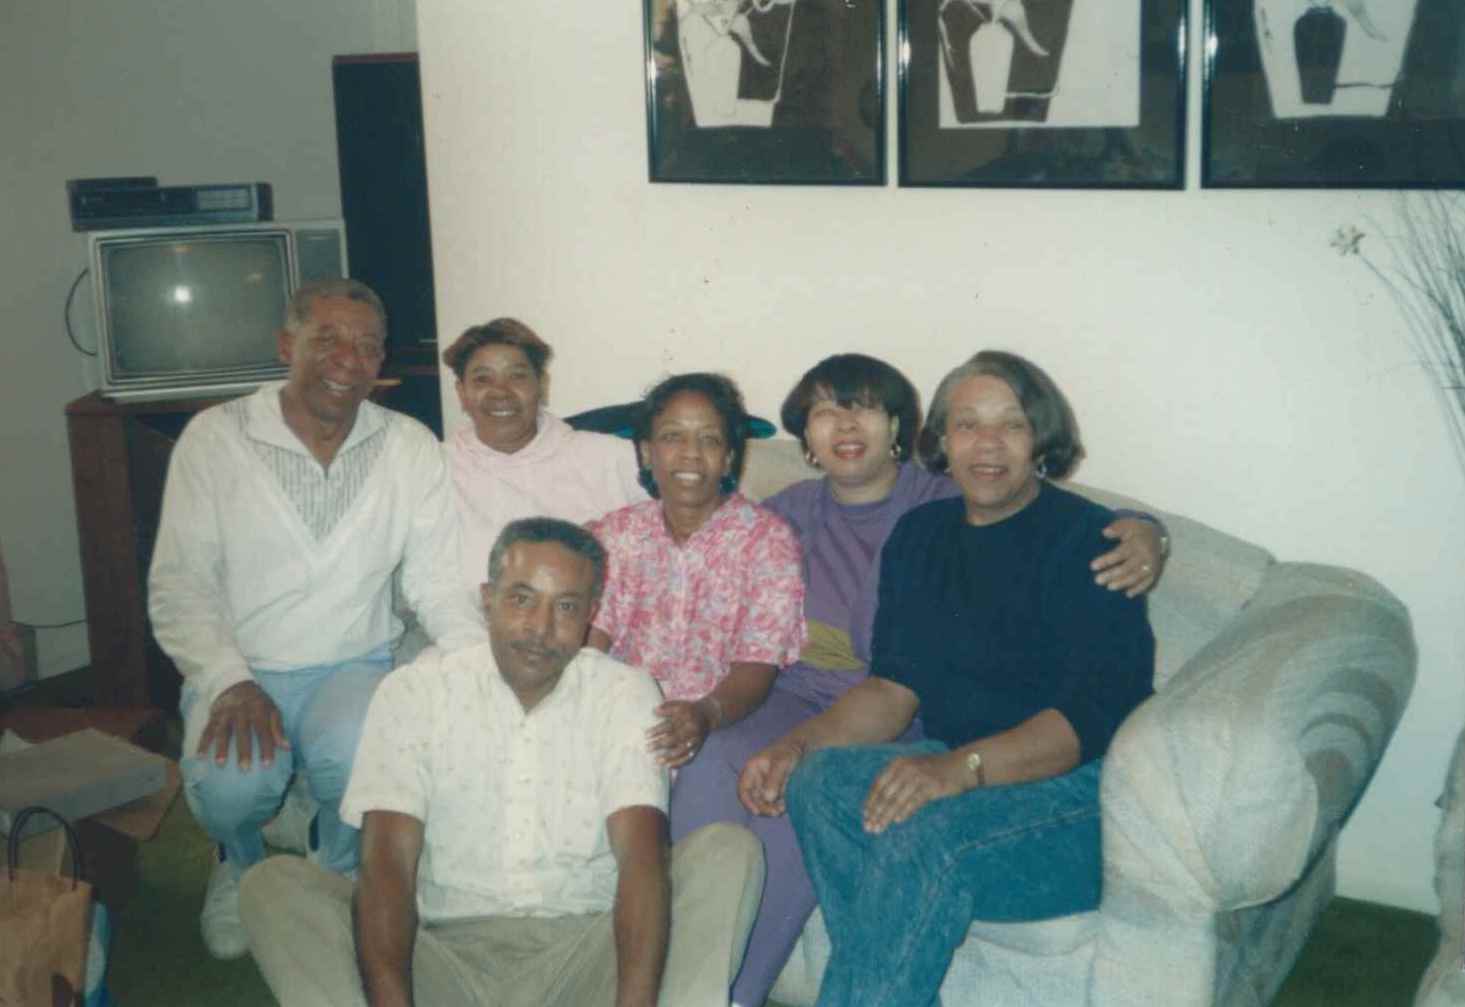 John Witherspoon relaxing with five of his siblings at home. With 10 siblings in all, he learned to lead and mentor others at a young age. (Courtesy of the Witherspoon family)